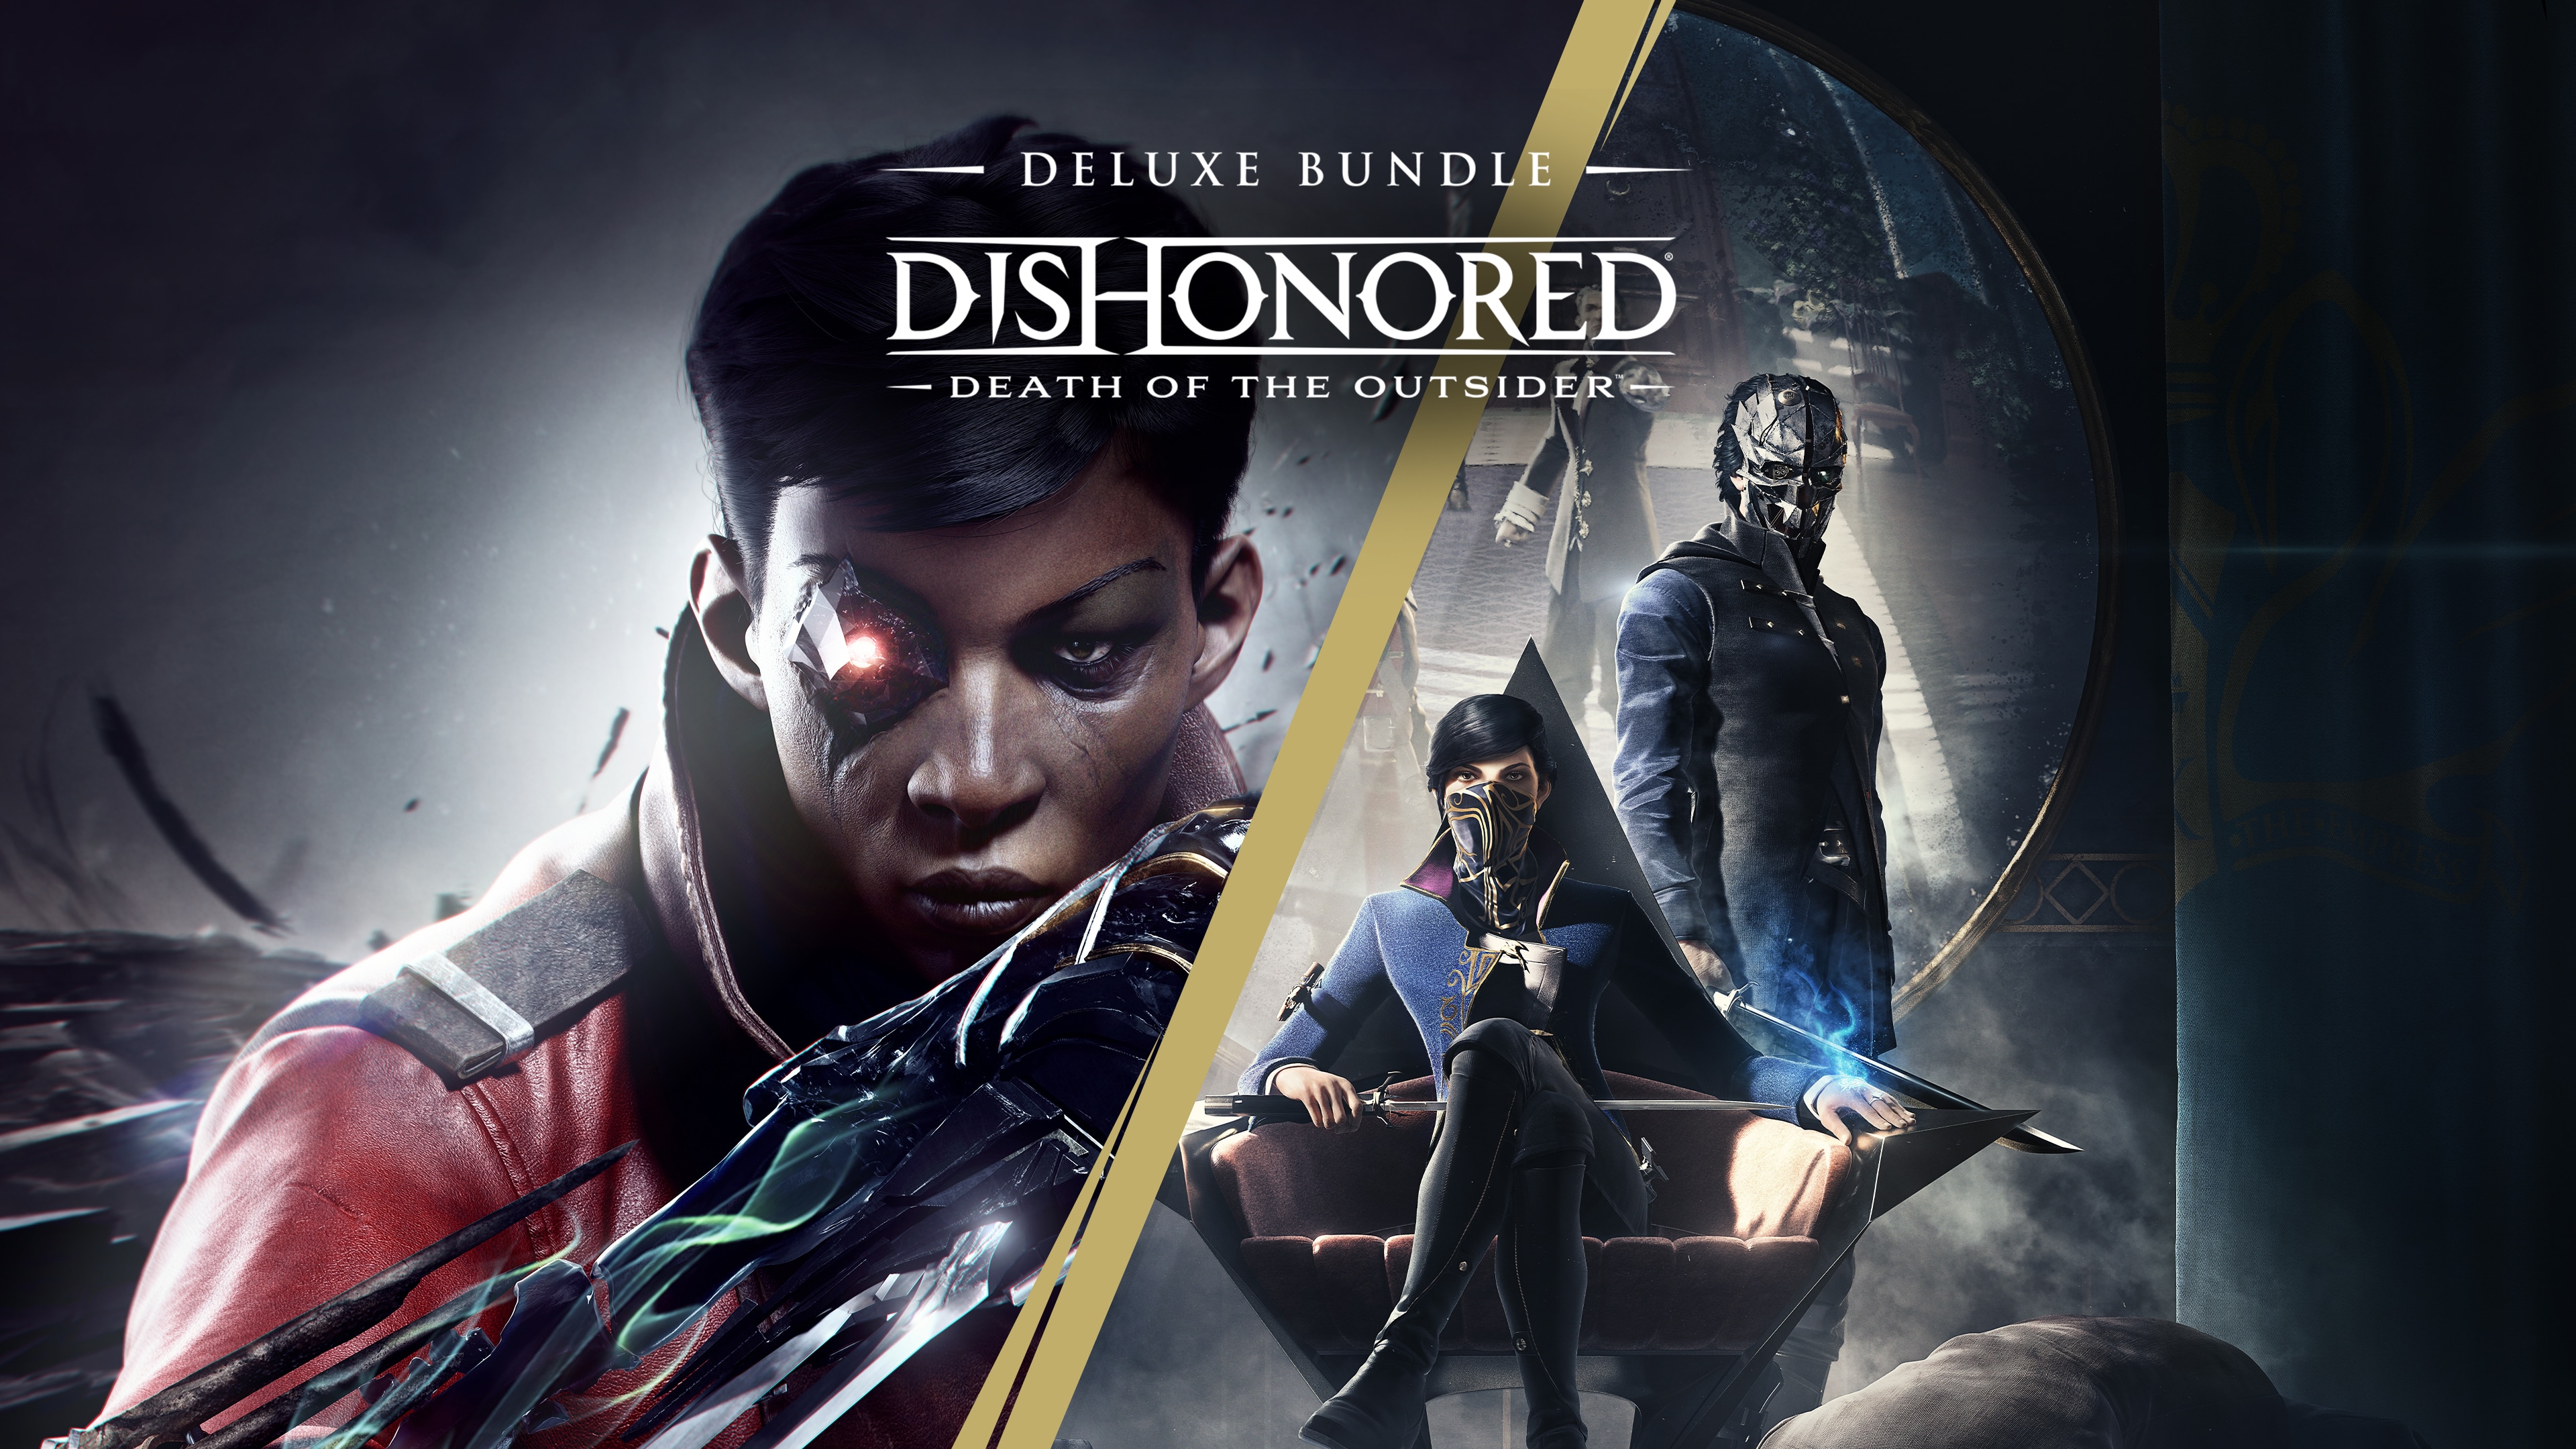 Dishonored: Death of the Outsider Images.